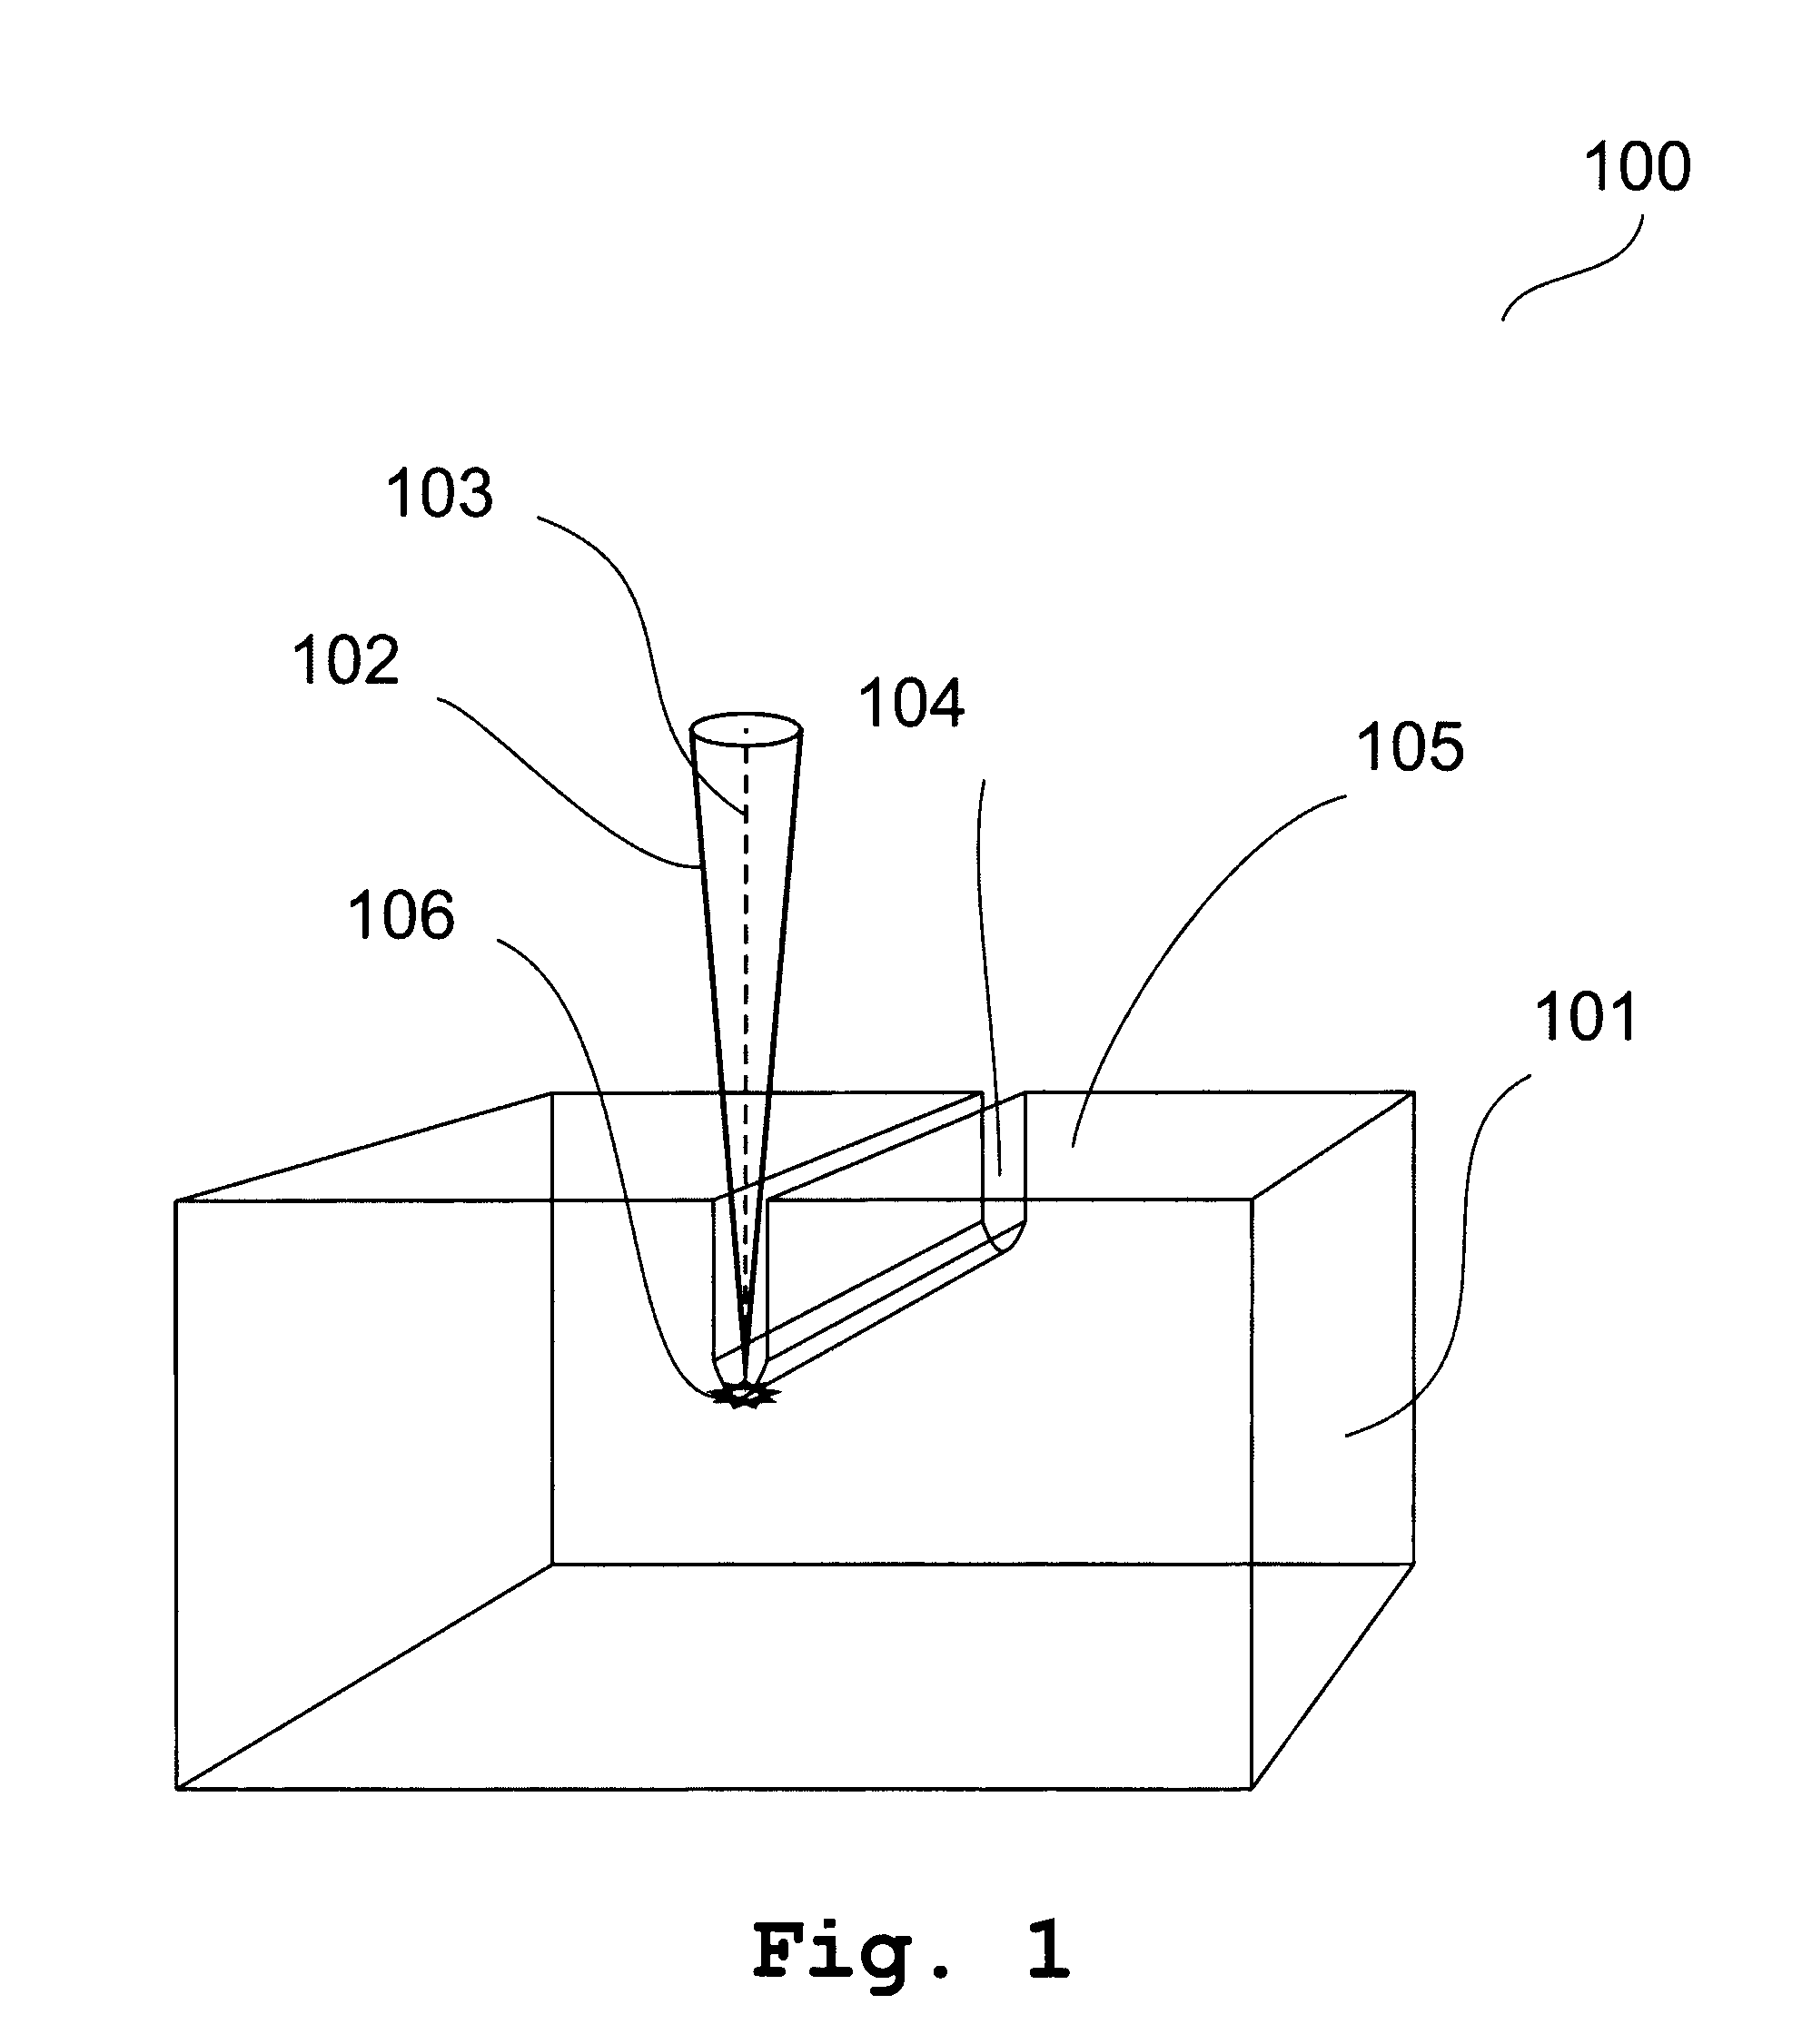 Method of Separating Surface Layer of Semiconductor Crystal Using a Laser Beam Perpendicular to the Separating Plane